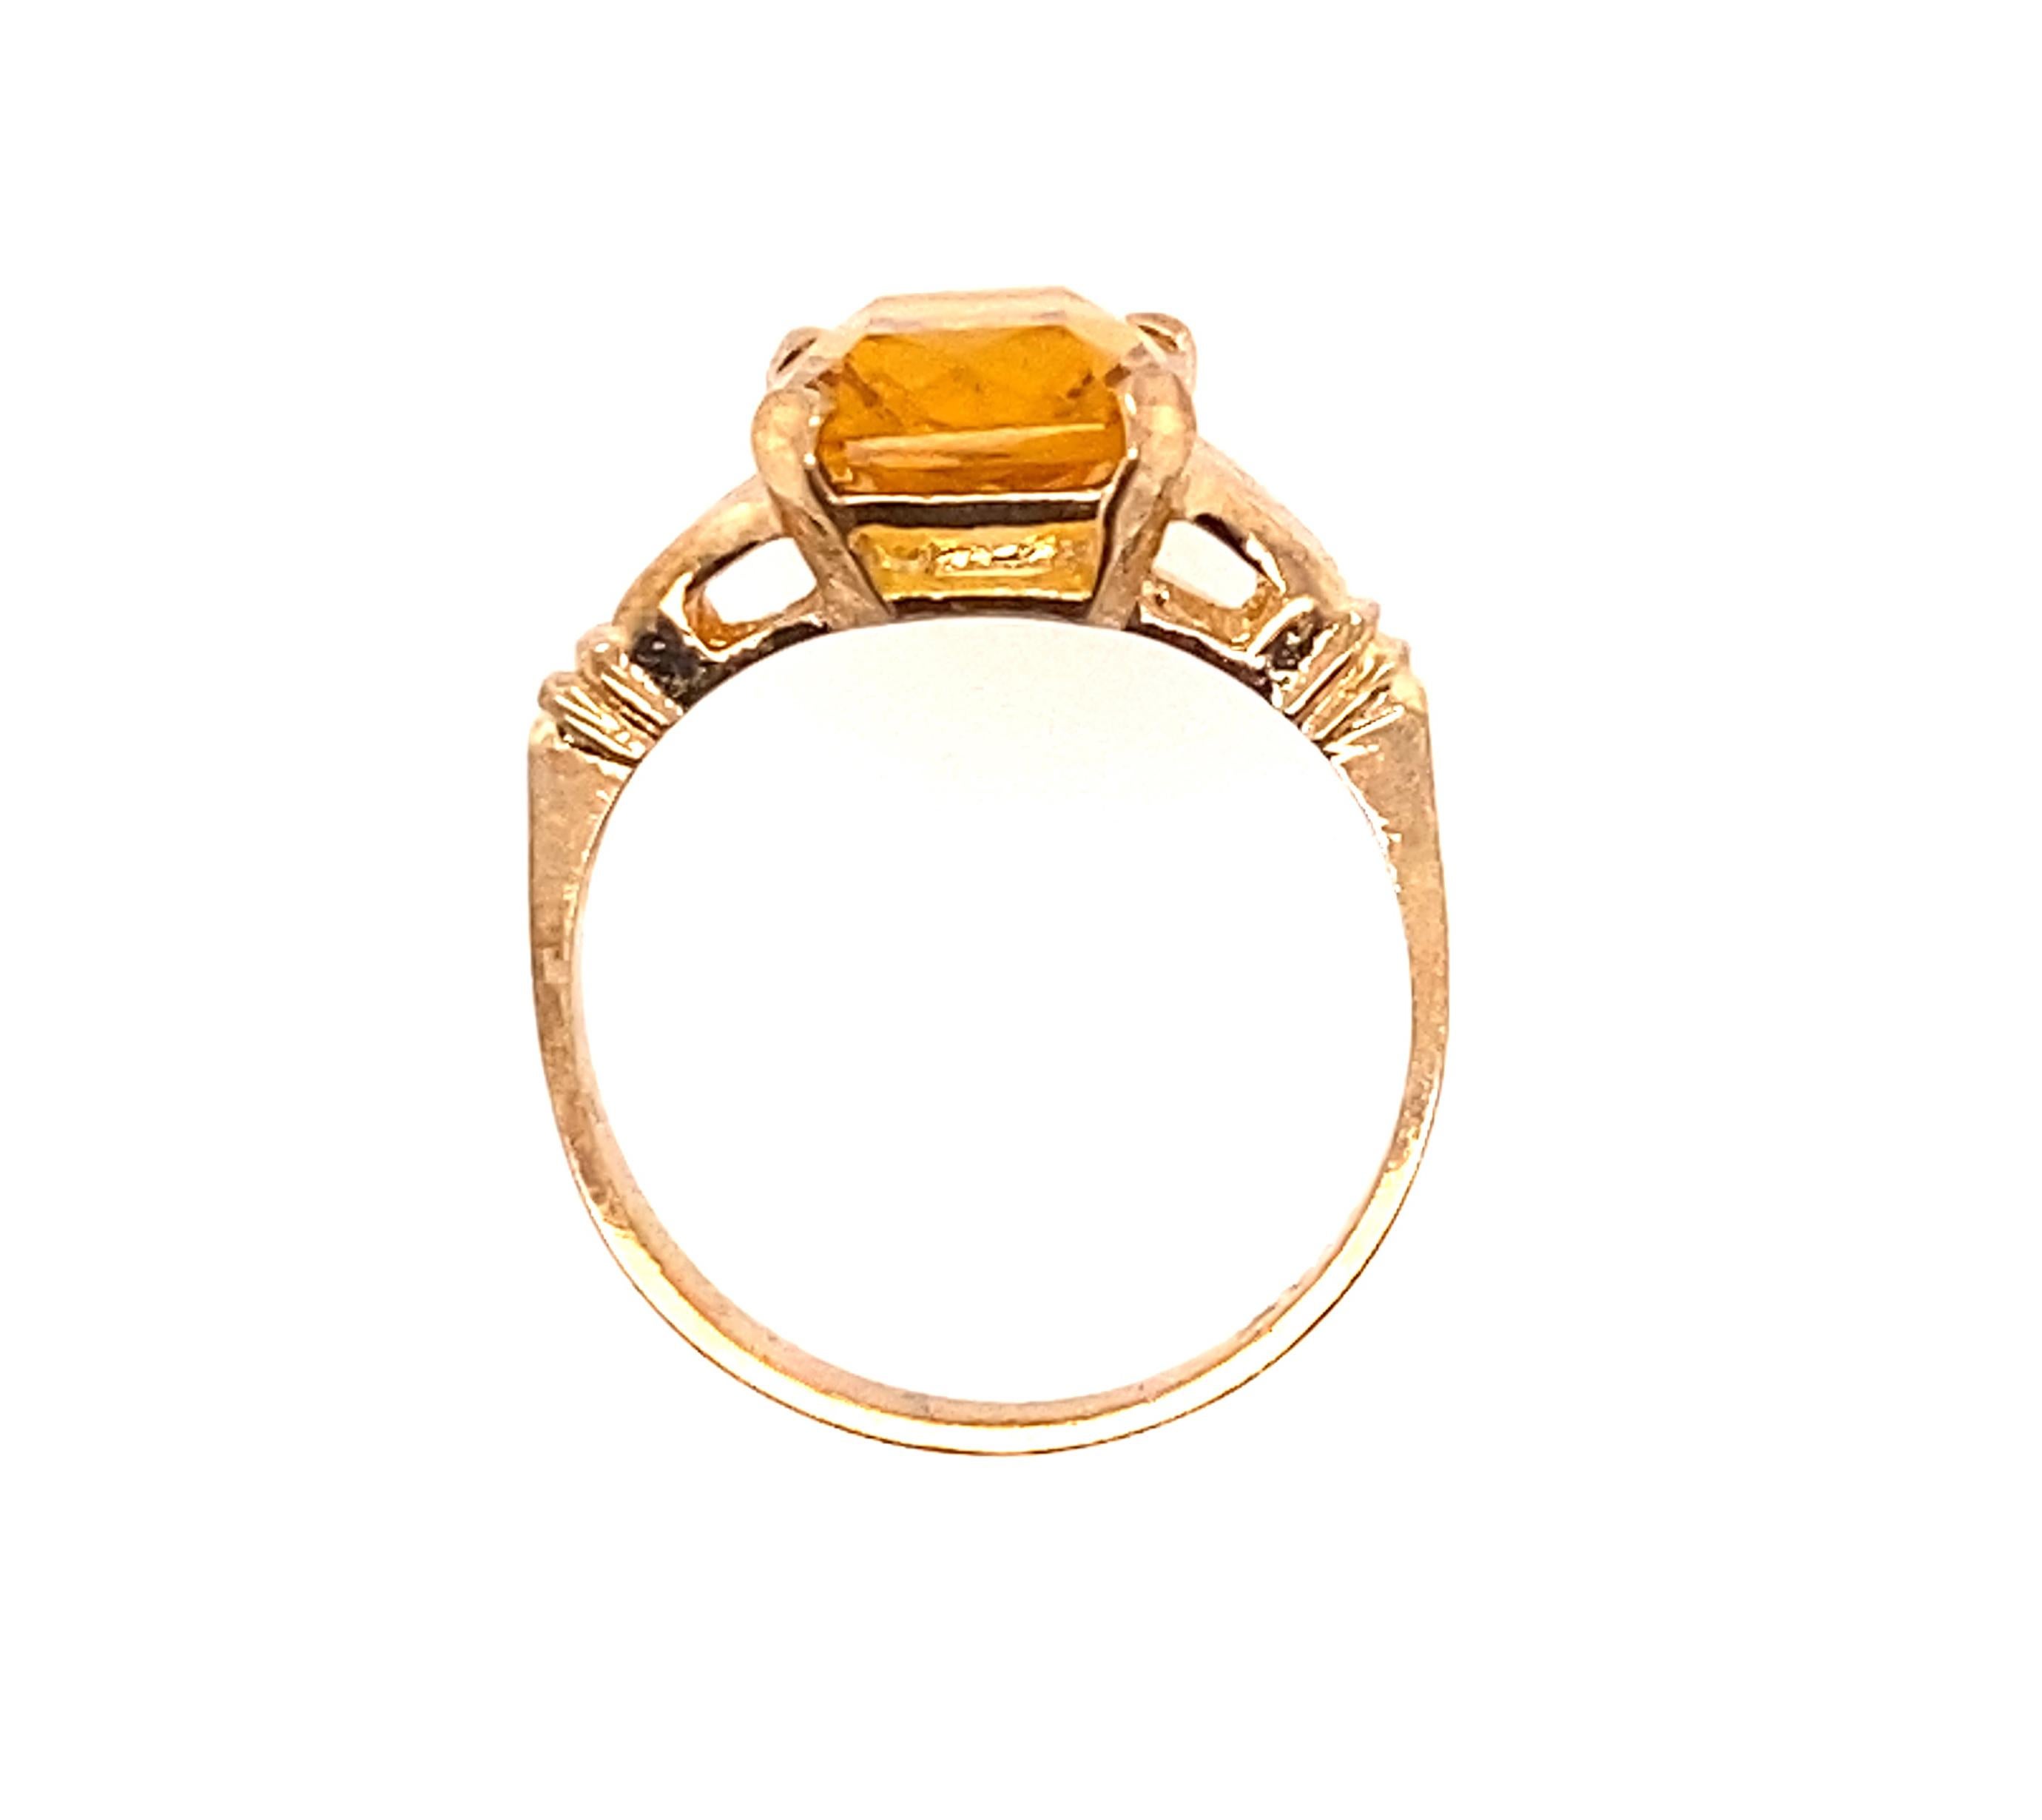 Genuine Original Retro Antique from 1940's New Old Stock Vintage Citrine Cocktail Ring 3ct Emerald Cut 10K Yellow Gold 


Featuring a Lab Grown 3ct Emerald Cut Citrine Gemstone Center

Genuine Antique from 1940's. Never Worn, Never Sold. Purchased